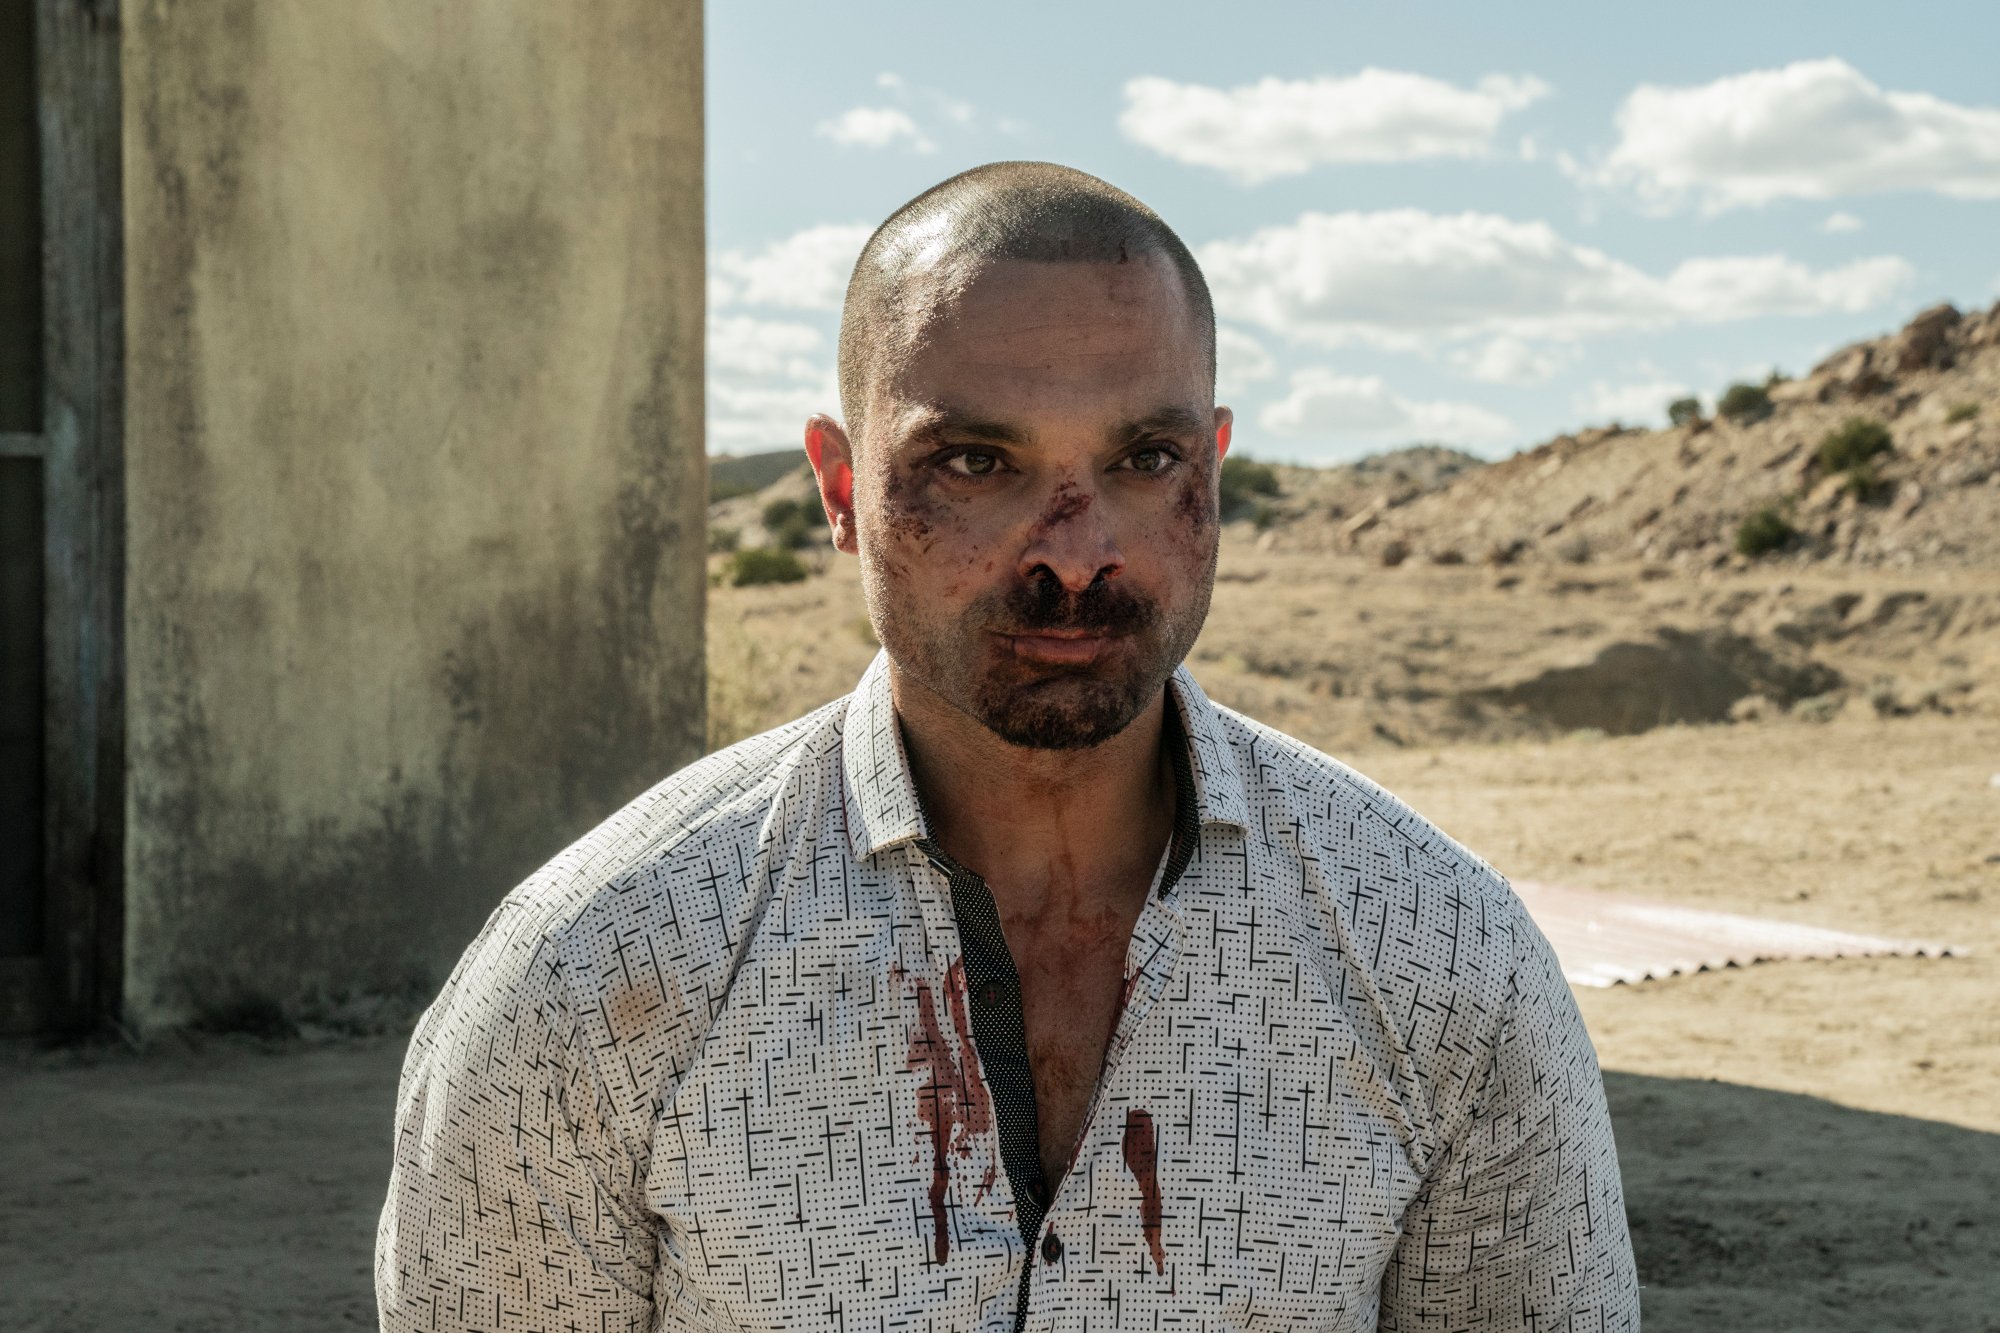 Michael Mando as Nacho Varga in 'Better Call Saul' Season 6 Episode 3. His face and clothes are bloody, and he's kneeling in the desert.